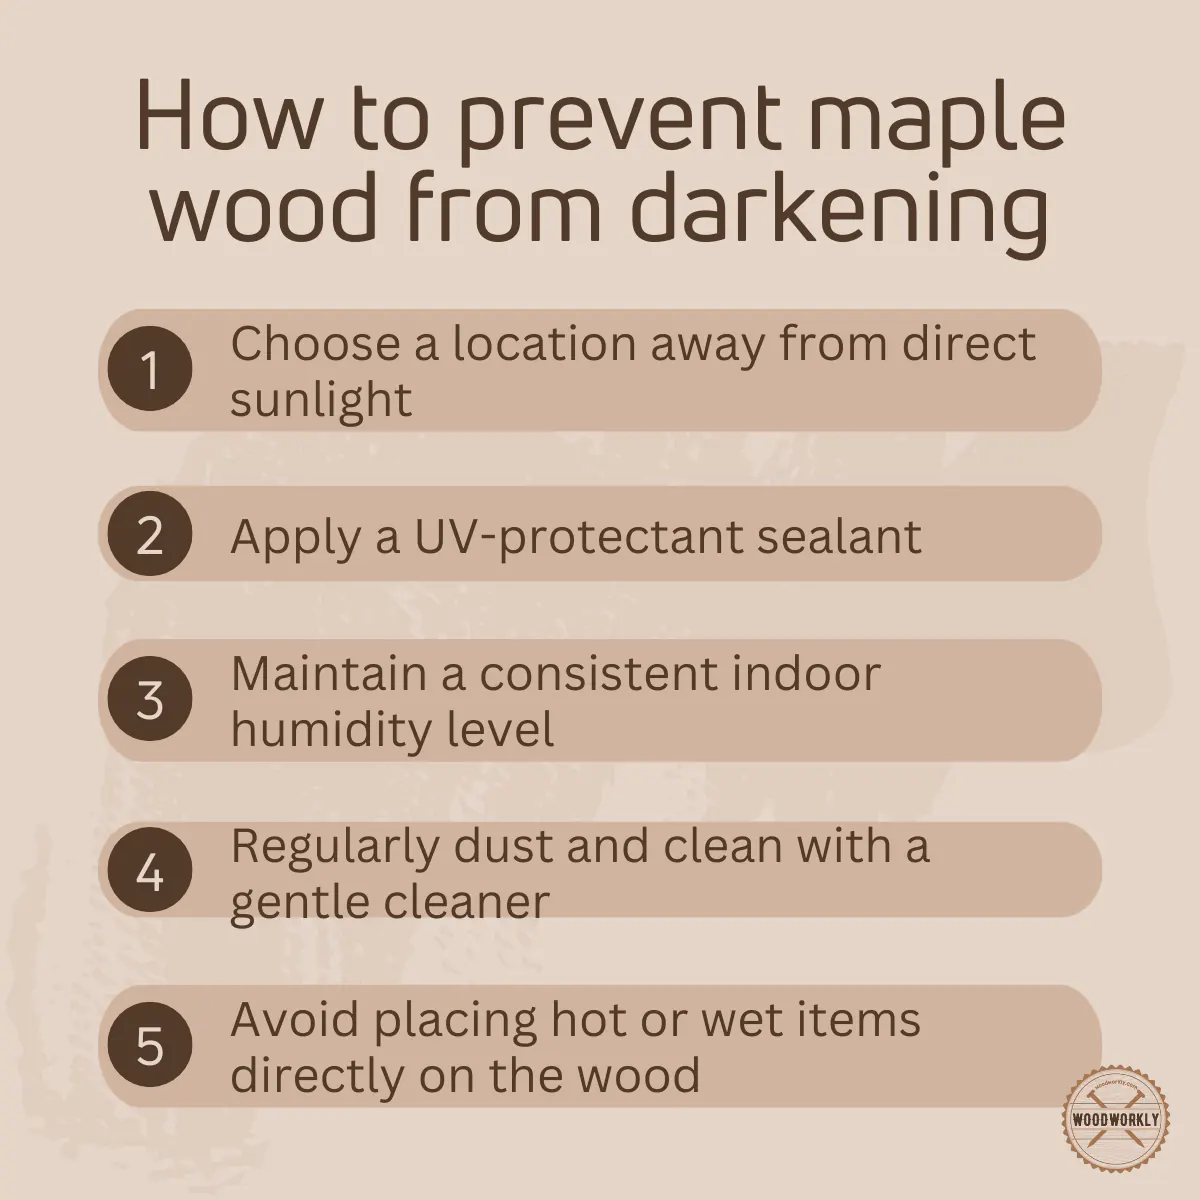 How to prevent maple wood from darkening